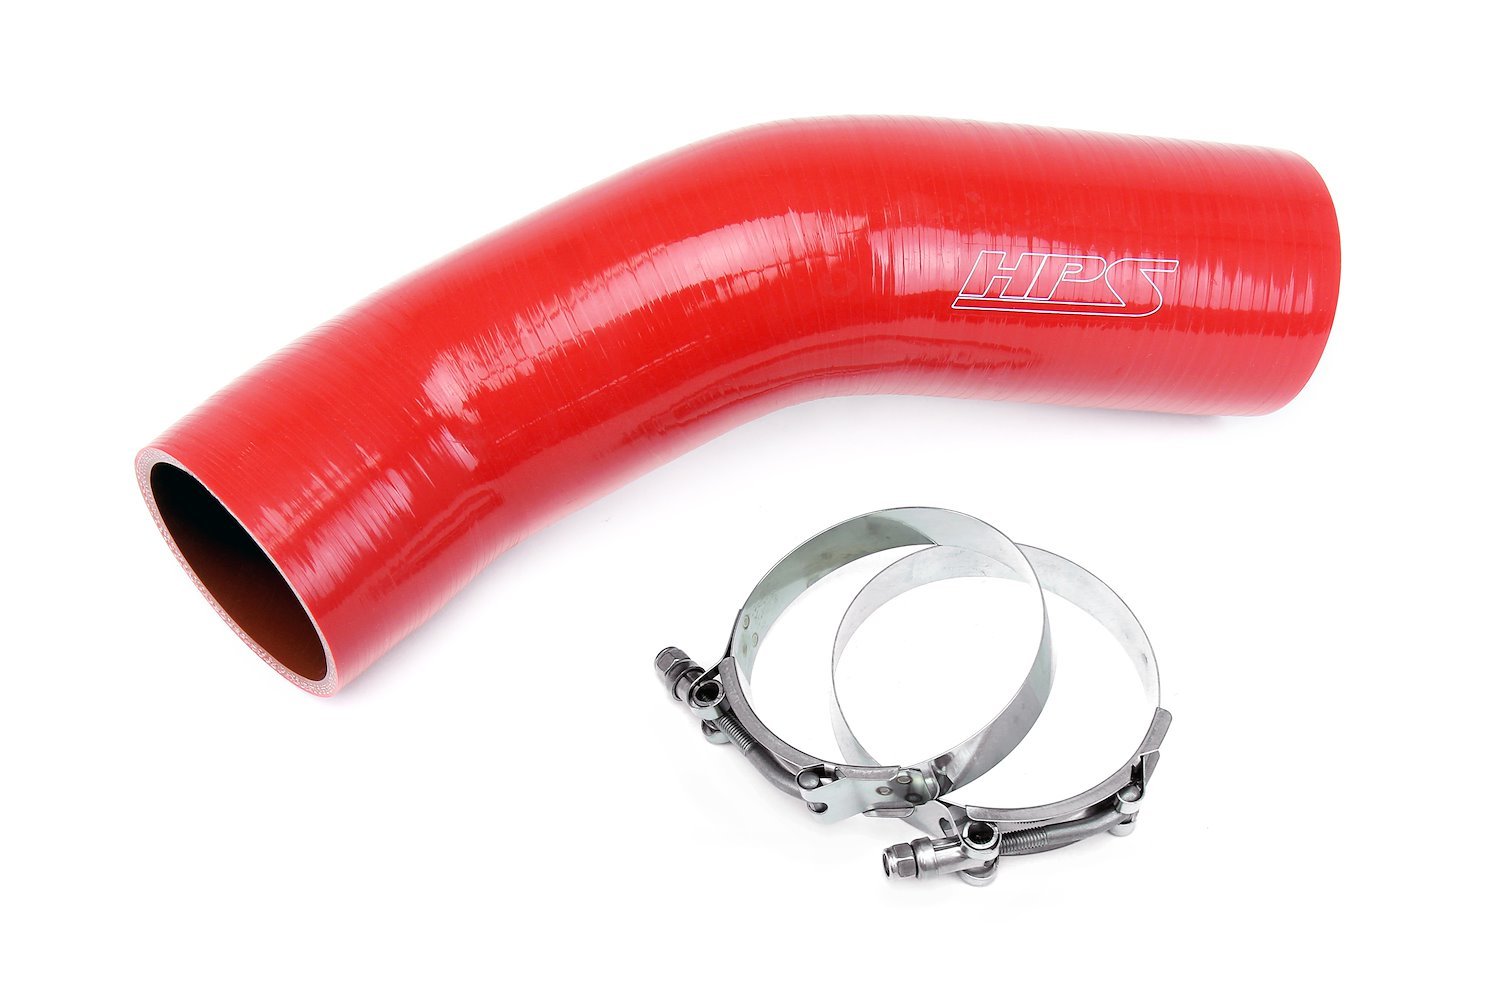 57-1879-RED Silicone Air Intake Kit, Replace Damaged Or Restrictive Stock Air Intake, Improve Throttle Response